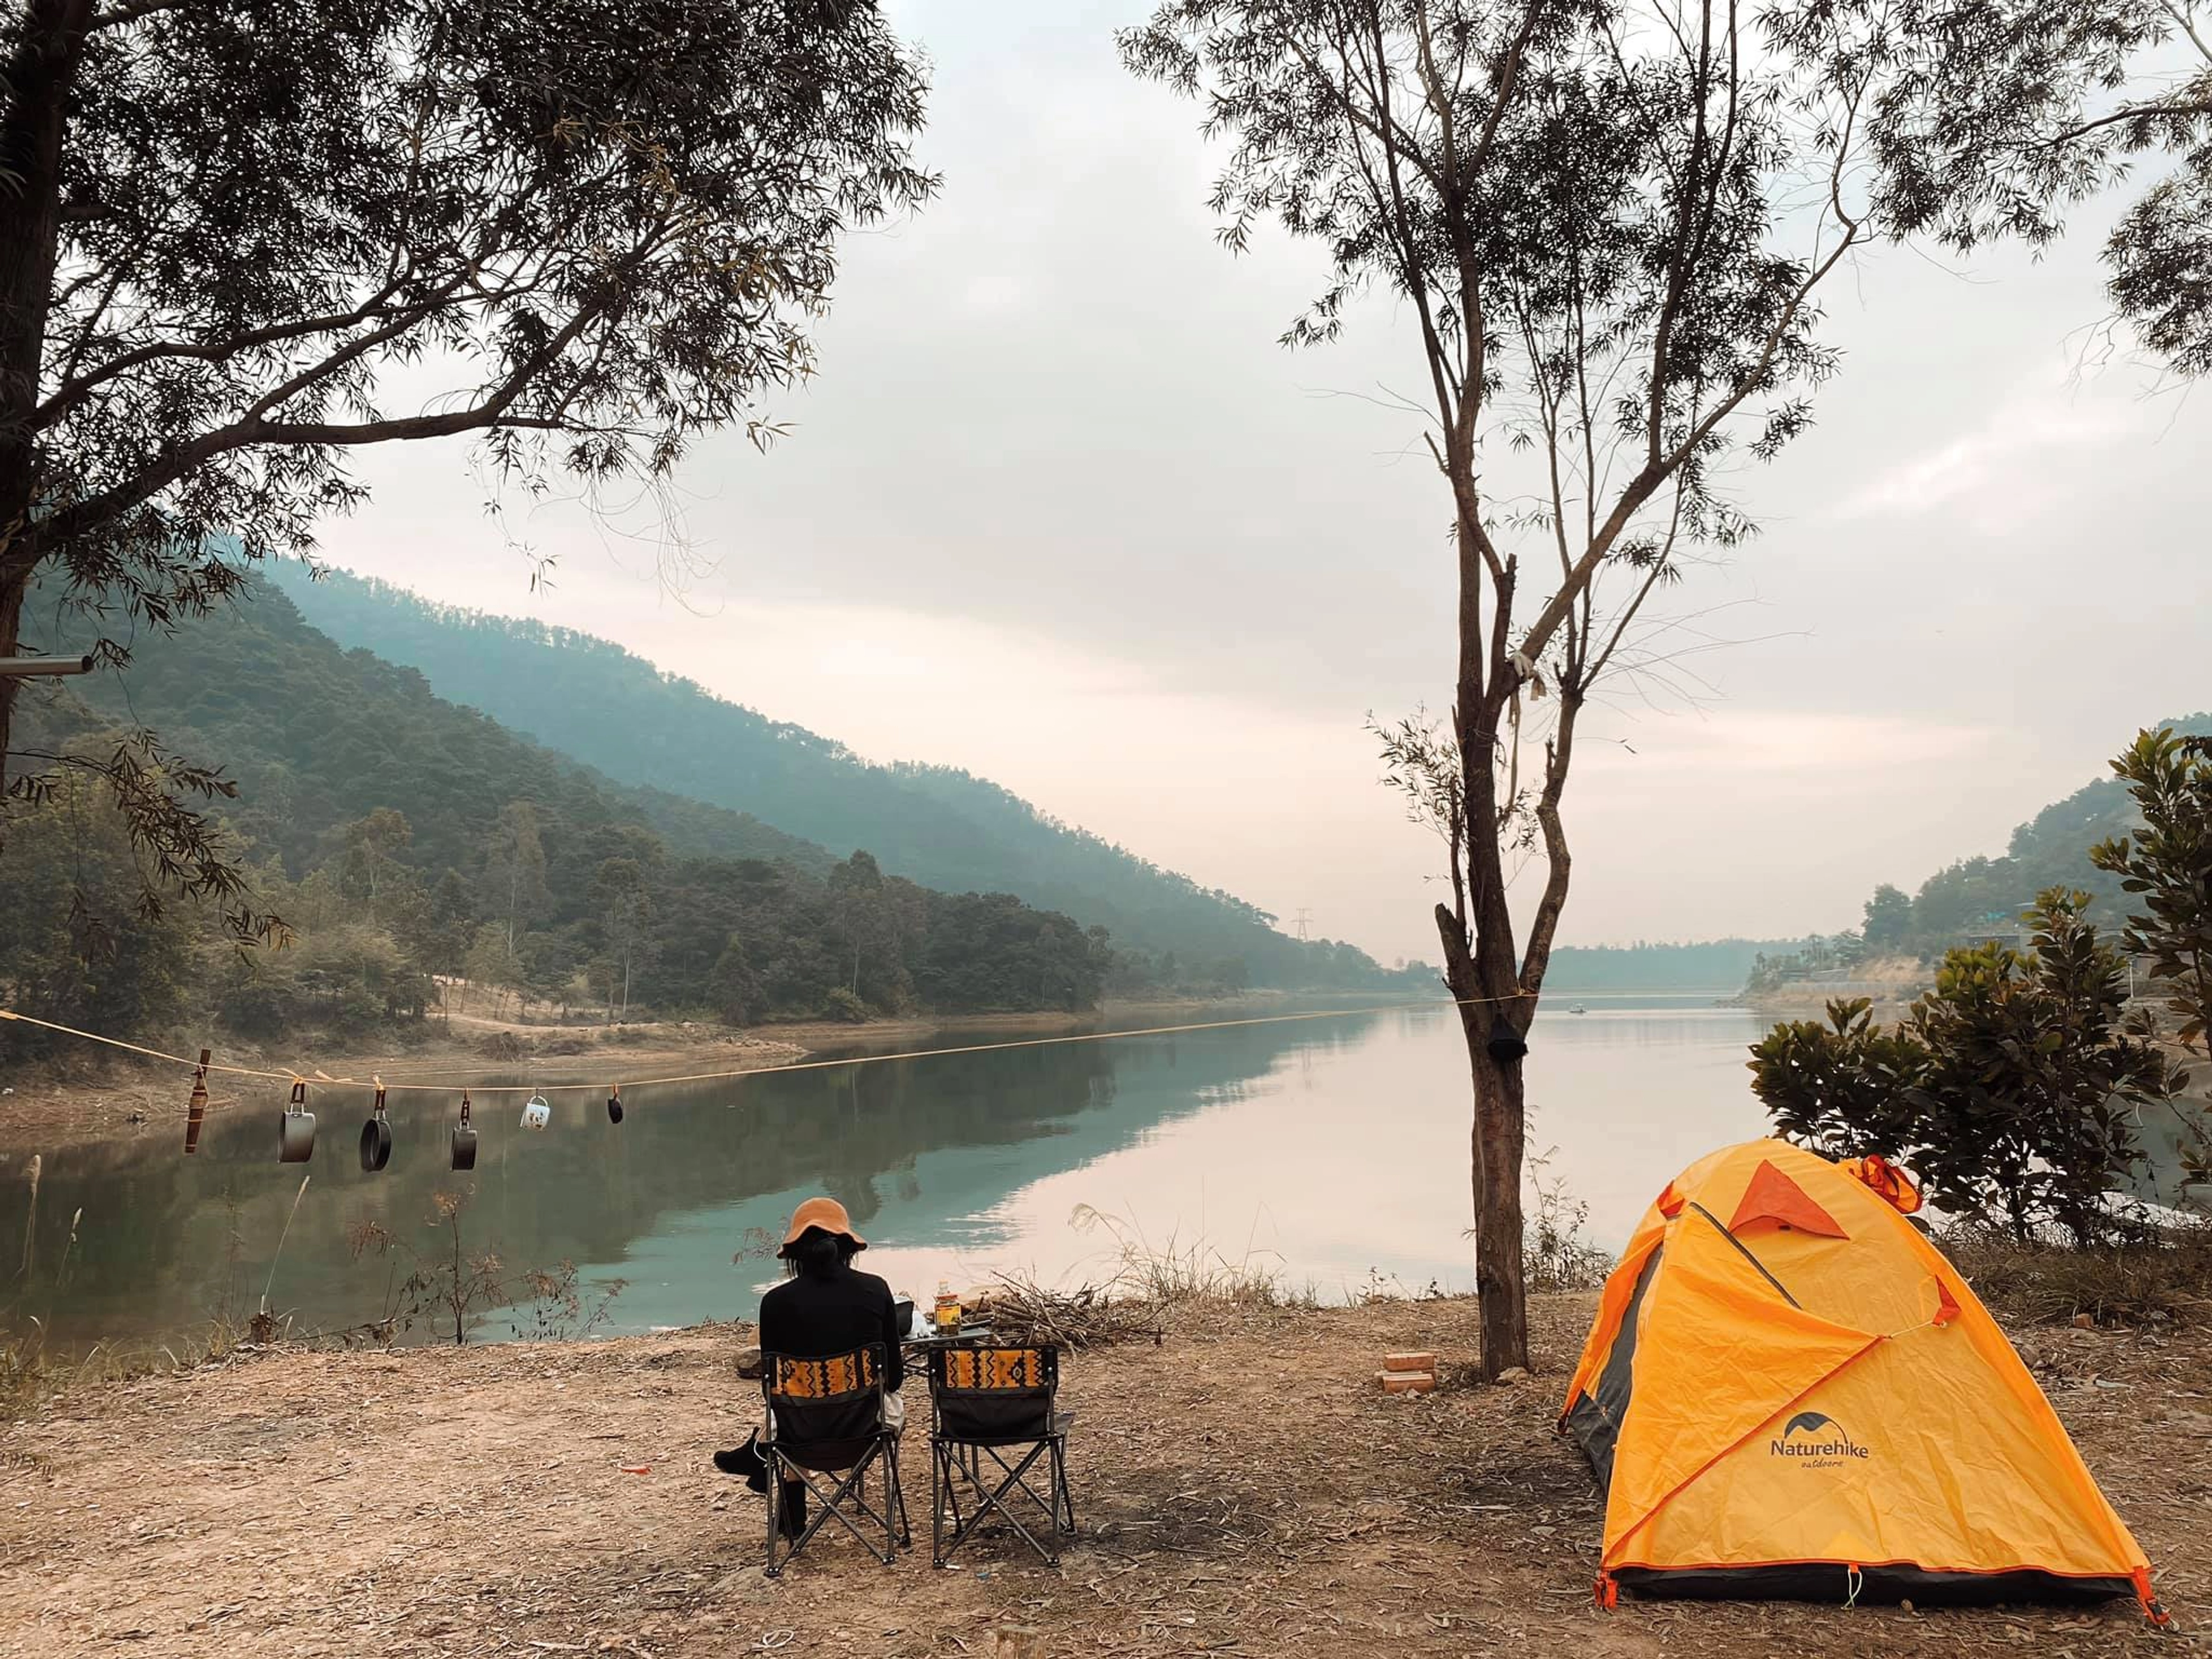 Dong Do Lake: Brand new Check-in point for nature-loving backpackers